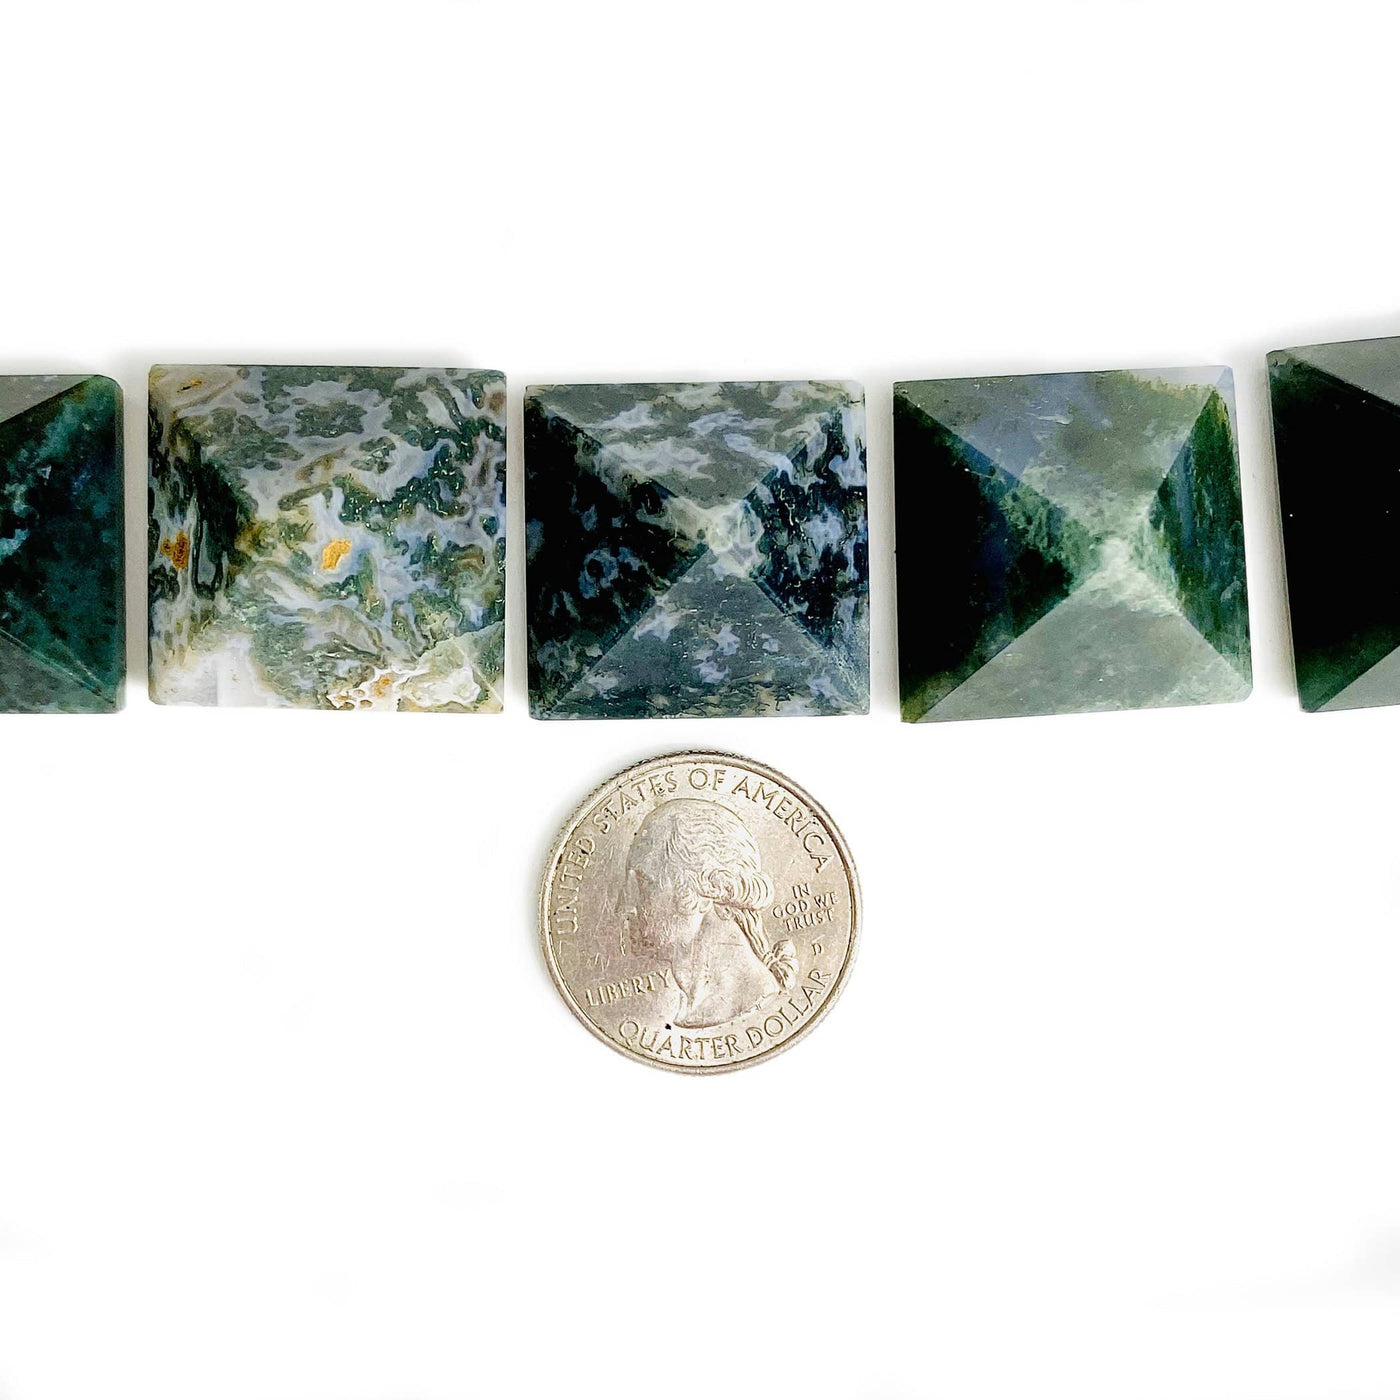 Moss agate assorted pyramids on a white background with a quarter next to it.  The pyramids are 1 inch and about the size of the quarter.